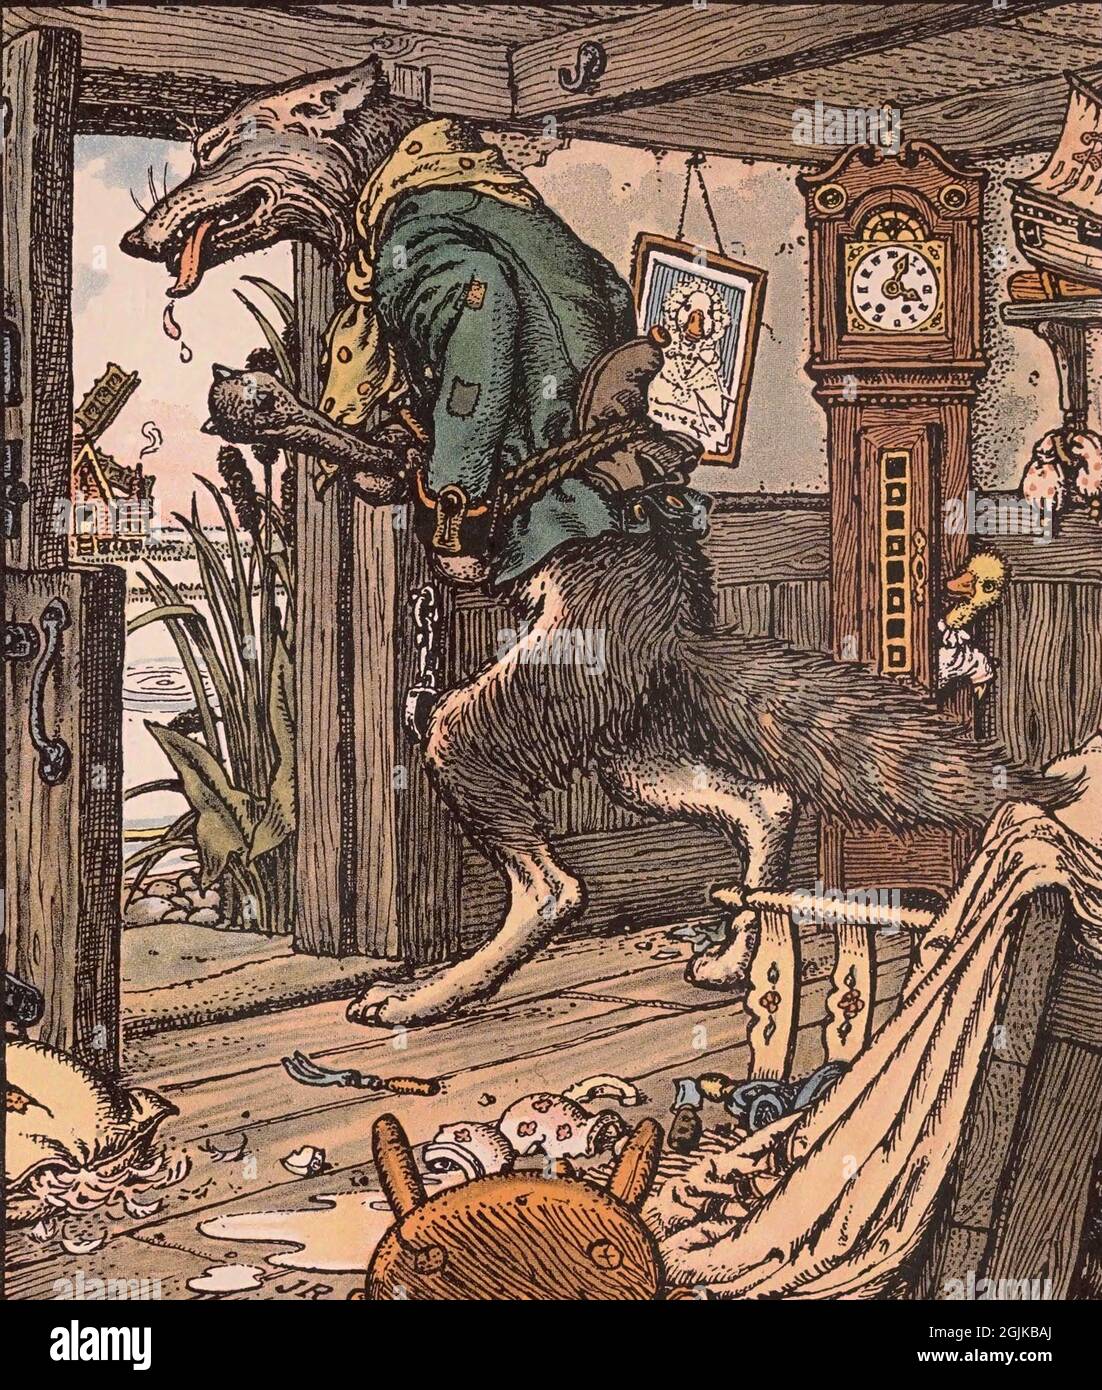 Illustration from the book Grimm's animal stories  The youghest gosling alone escapes Stock Photo